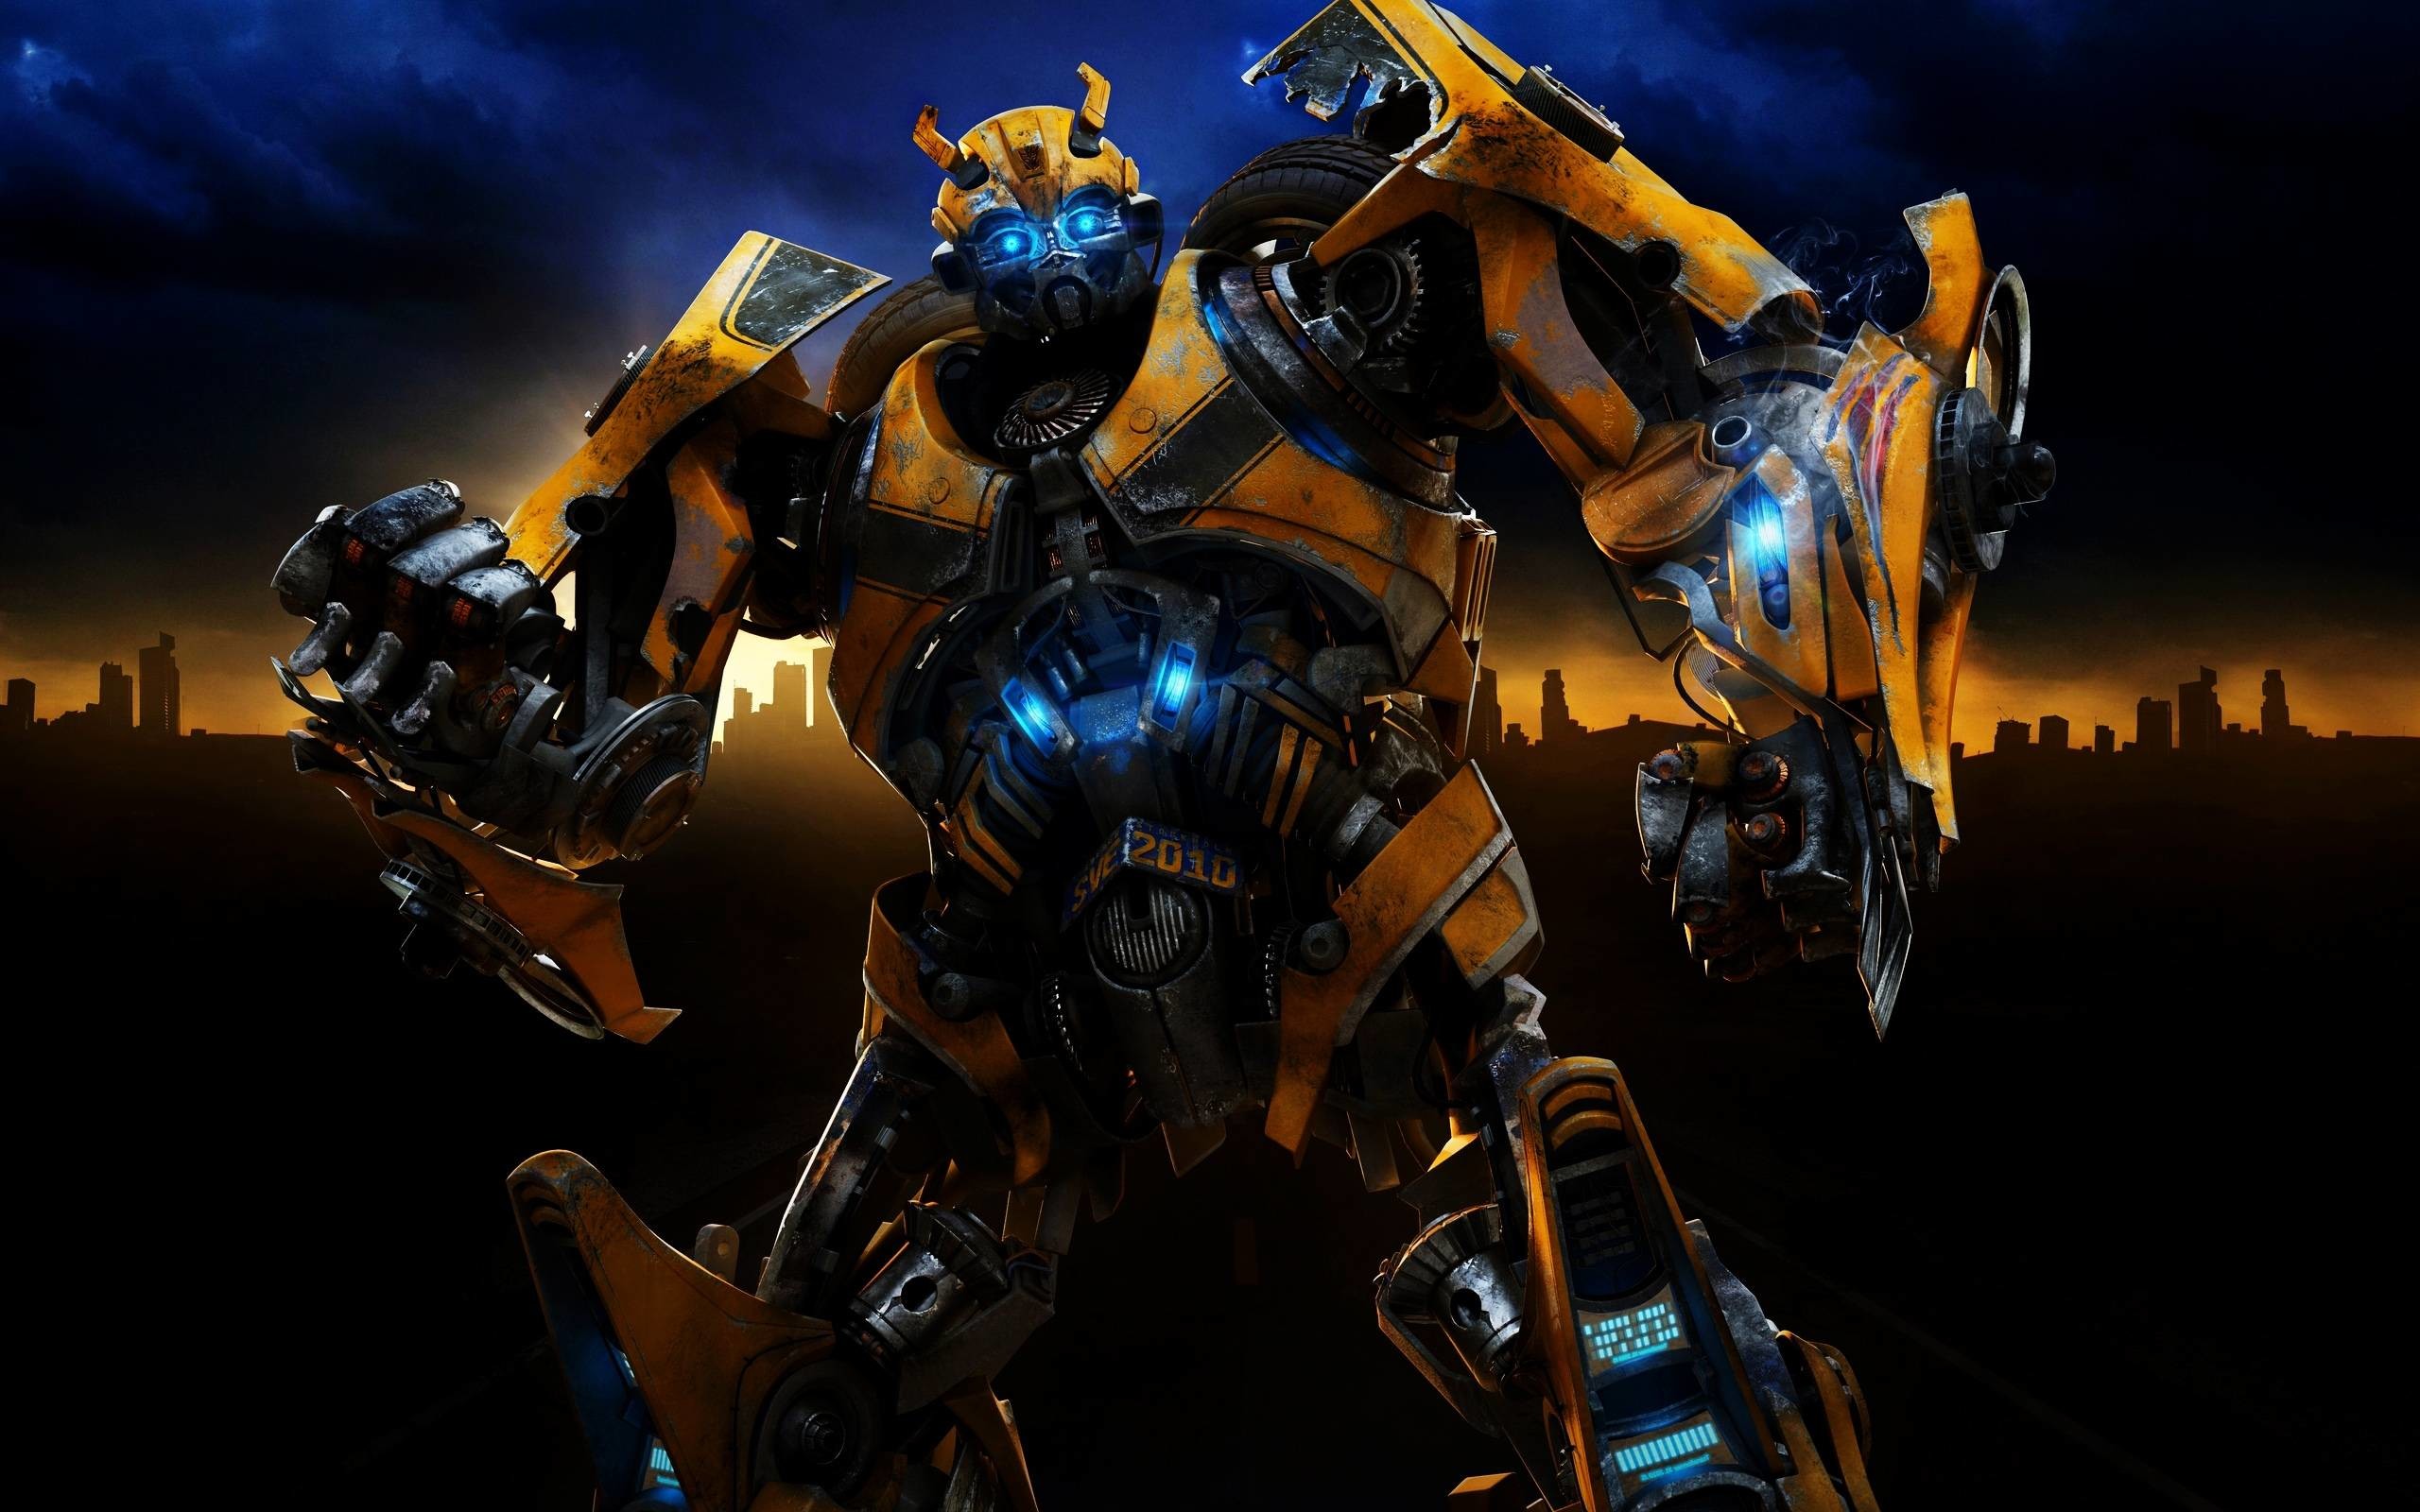 2560x1600 Autobot Wallpapers - Full HD wallpaper search